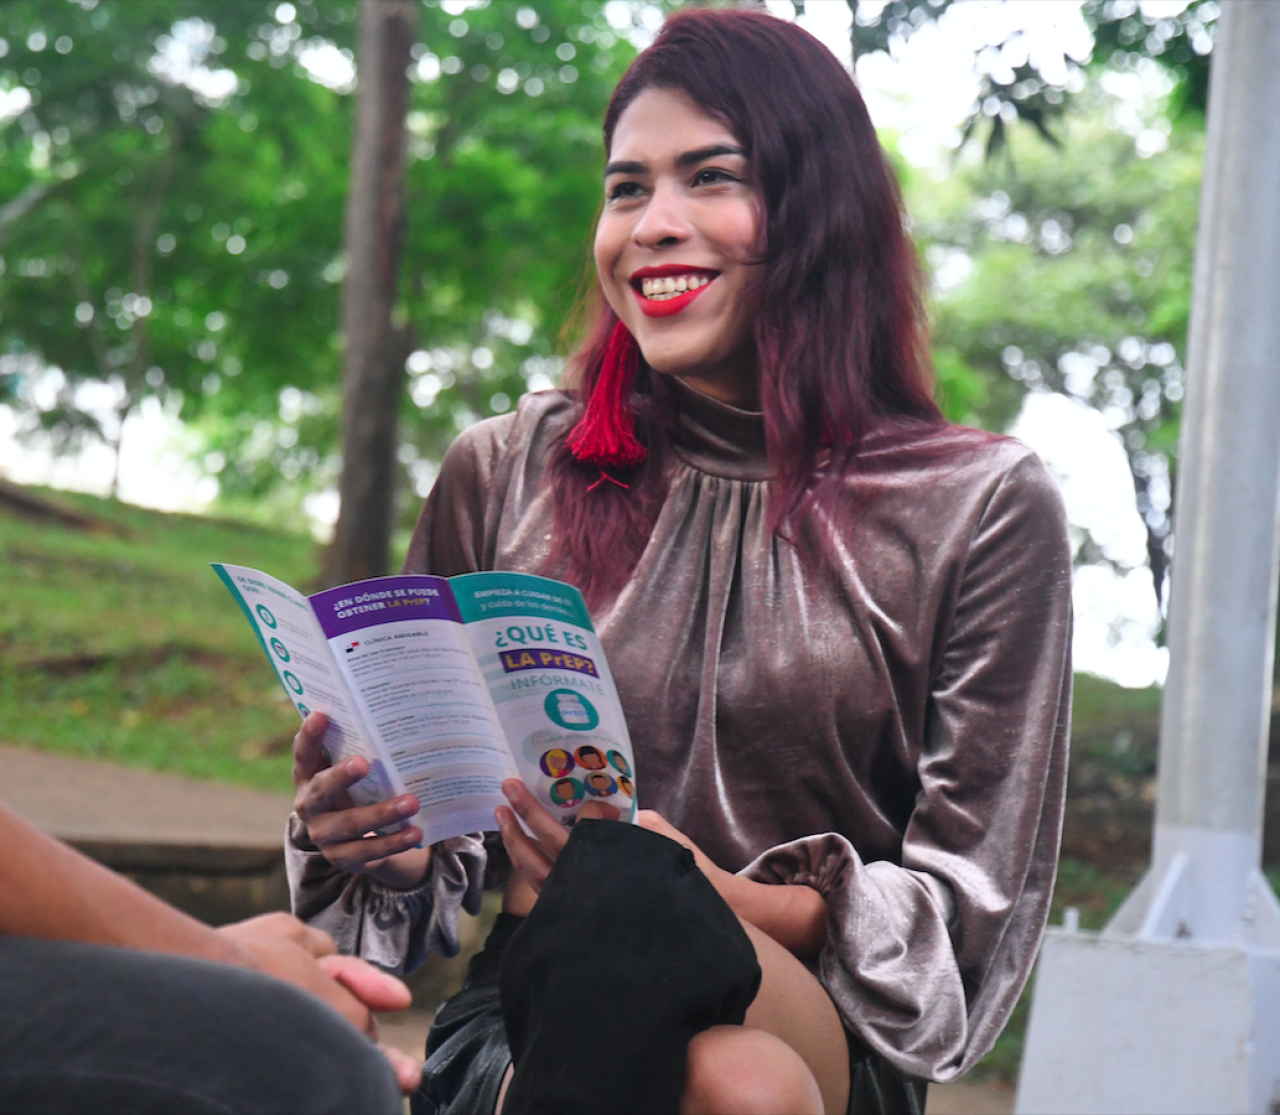 Woman smiles while holding a pamphlet